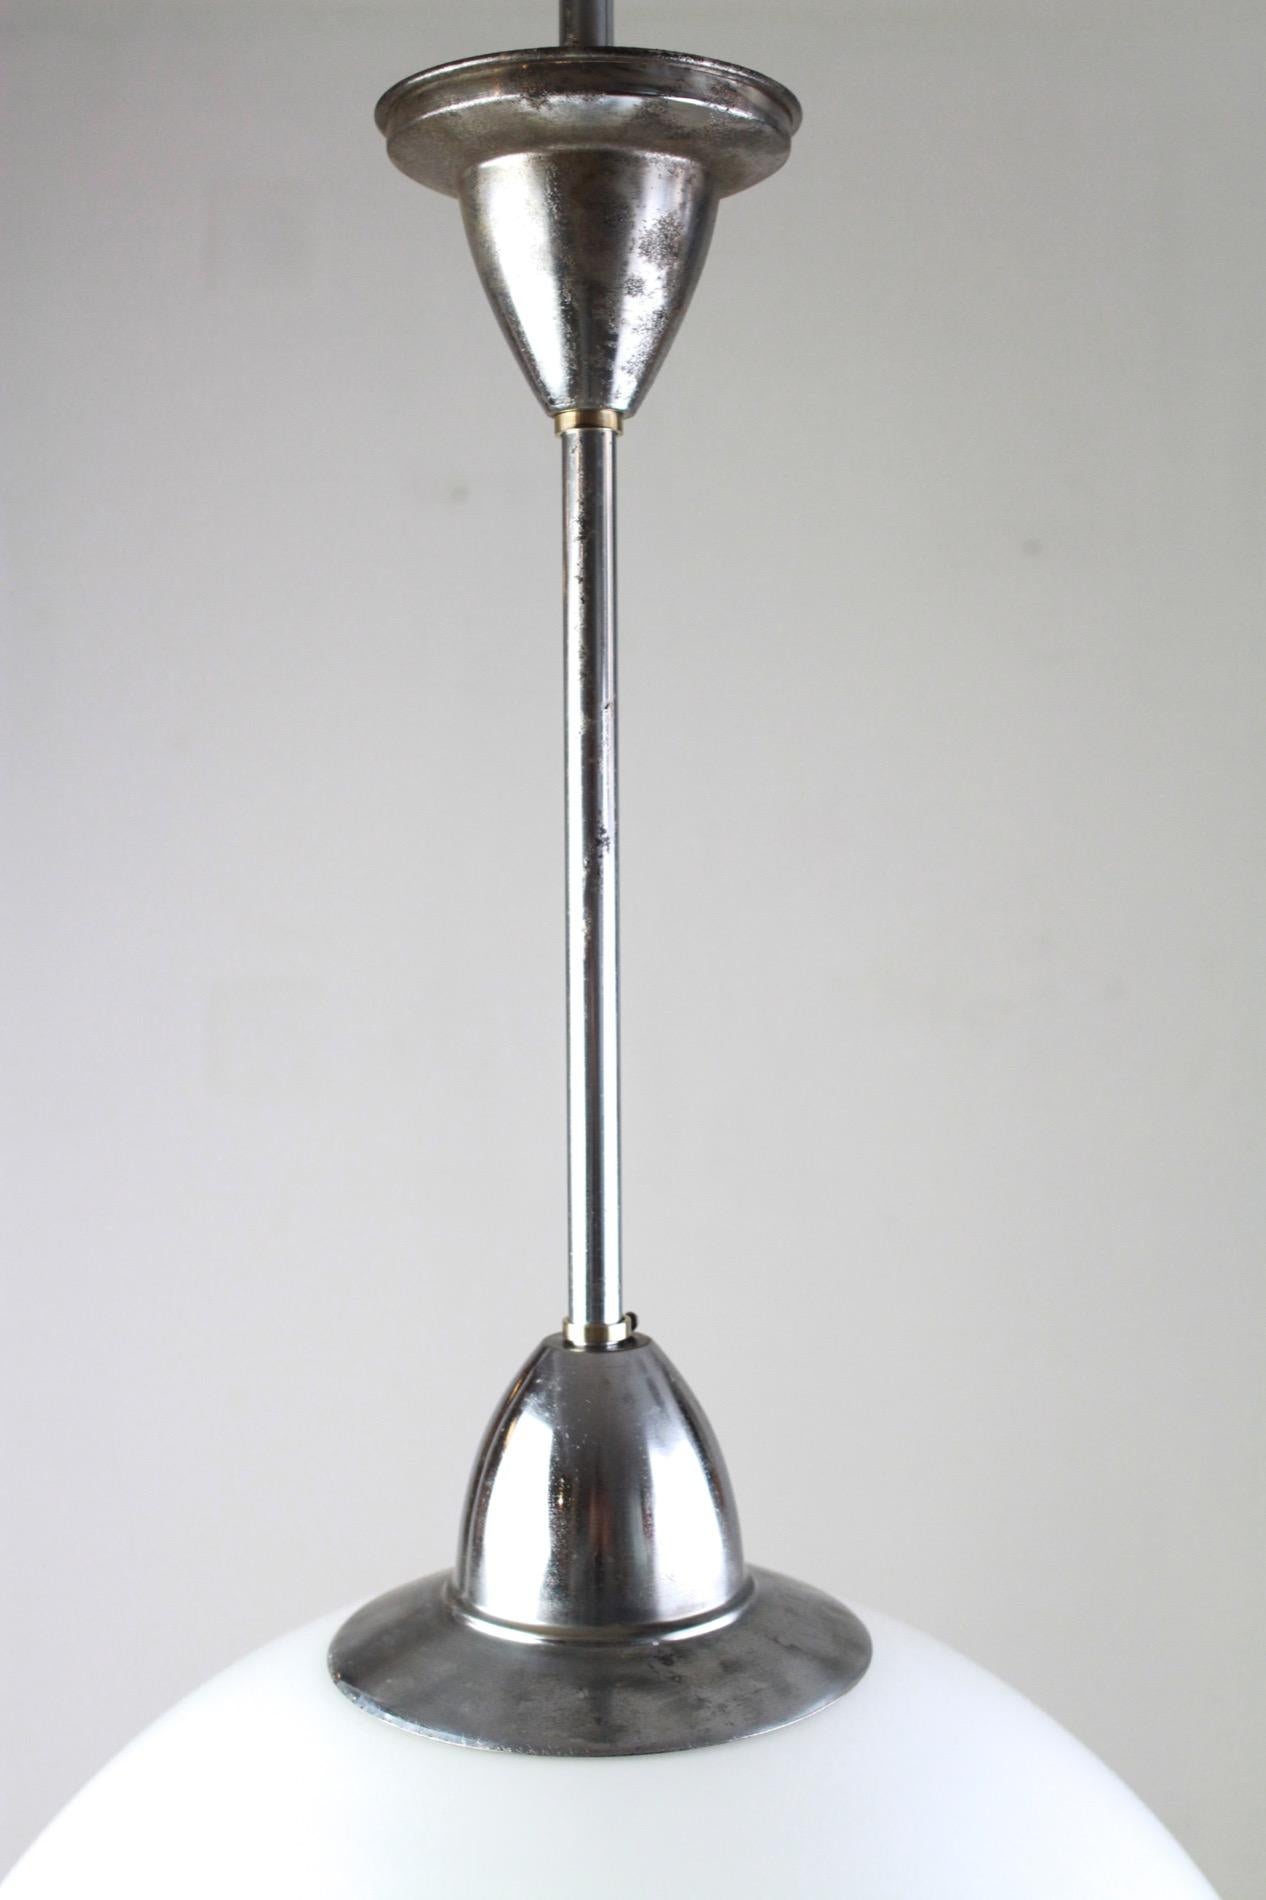 Large size Art Deco pendant with a flawless, geometric, stepped milk glass globe. The other parts are chrome-plated. It features a new E27 socket and new cables inside.
 